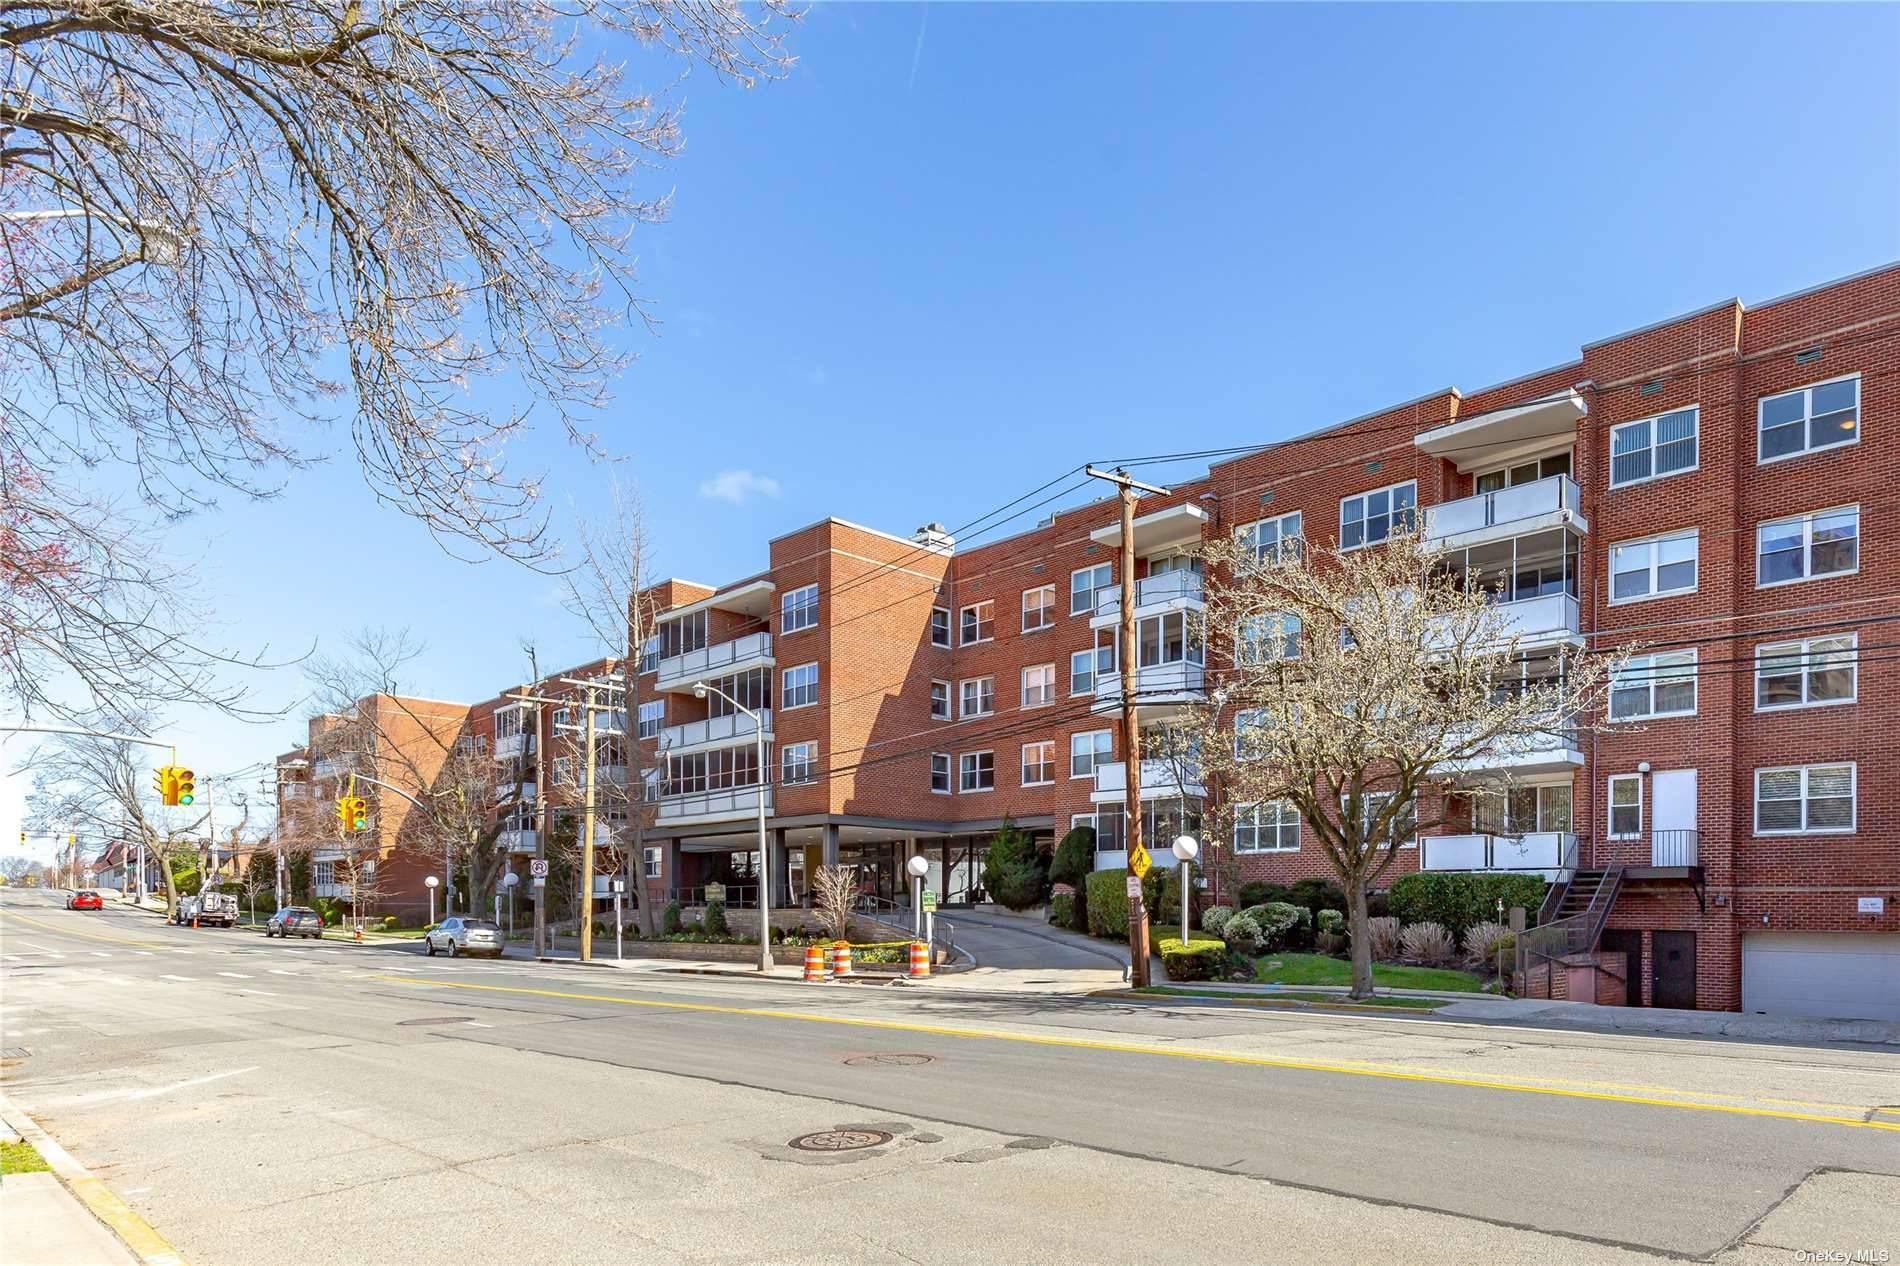 ONE KENSINGTON GATE TOTALLY Renovated 3rd Floor JR 4 with Terrace overlooking scenic garden views from every room Elegant spacious interiors with lots of closets amp ; gorgeous hardwood floors.